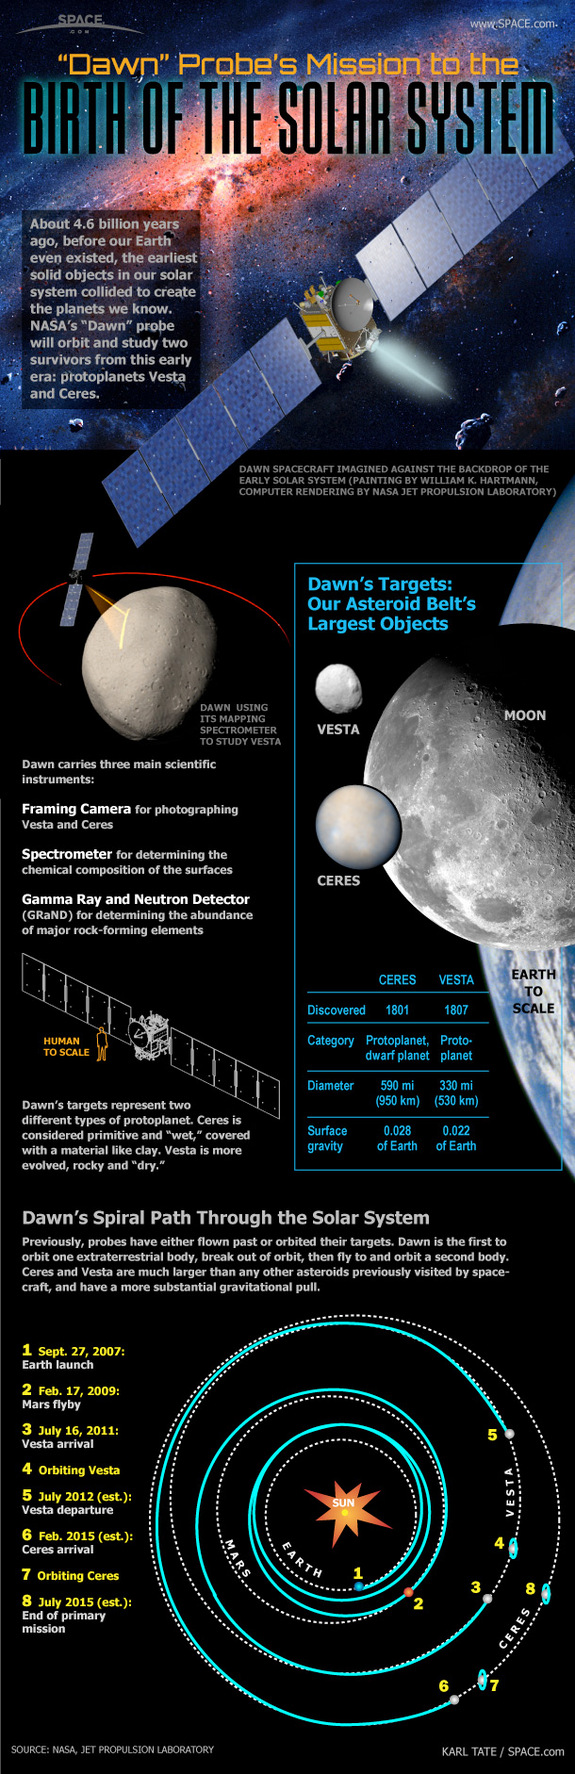 See how NASA's Dawn spacecraft will visit the asteroids Vesta and Ceres in this SPACE.com infographic.